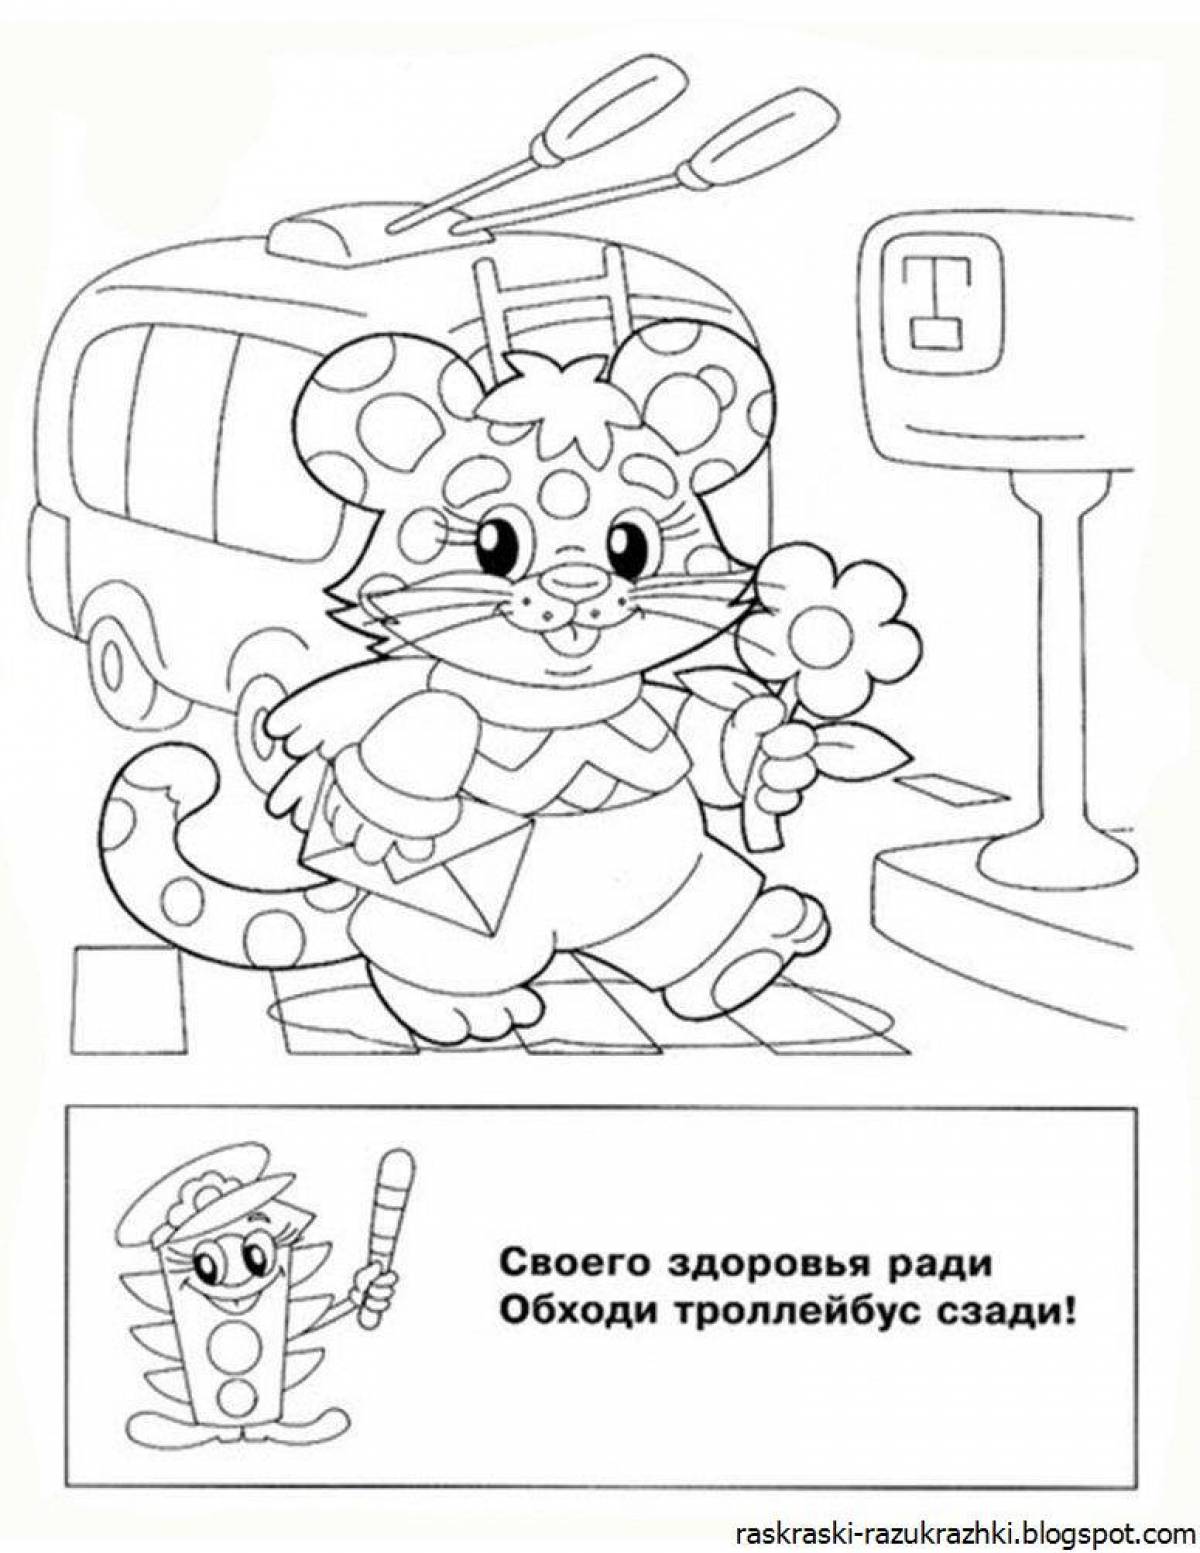 Colorful rules of the road coloring book for preschoolers